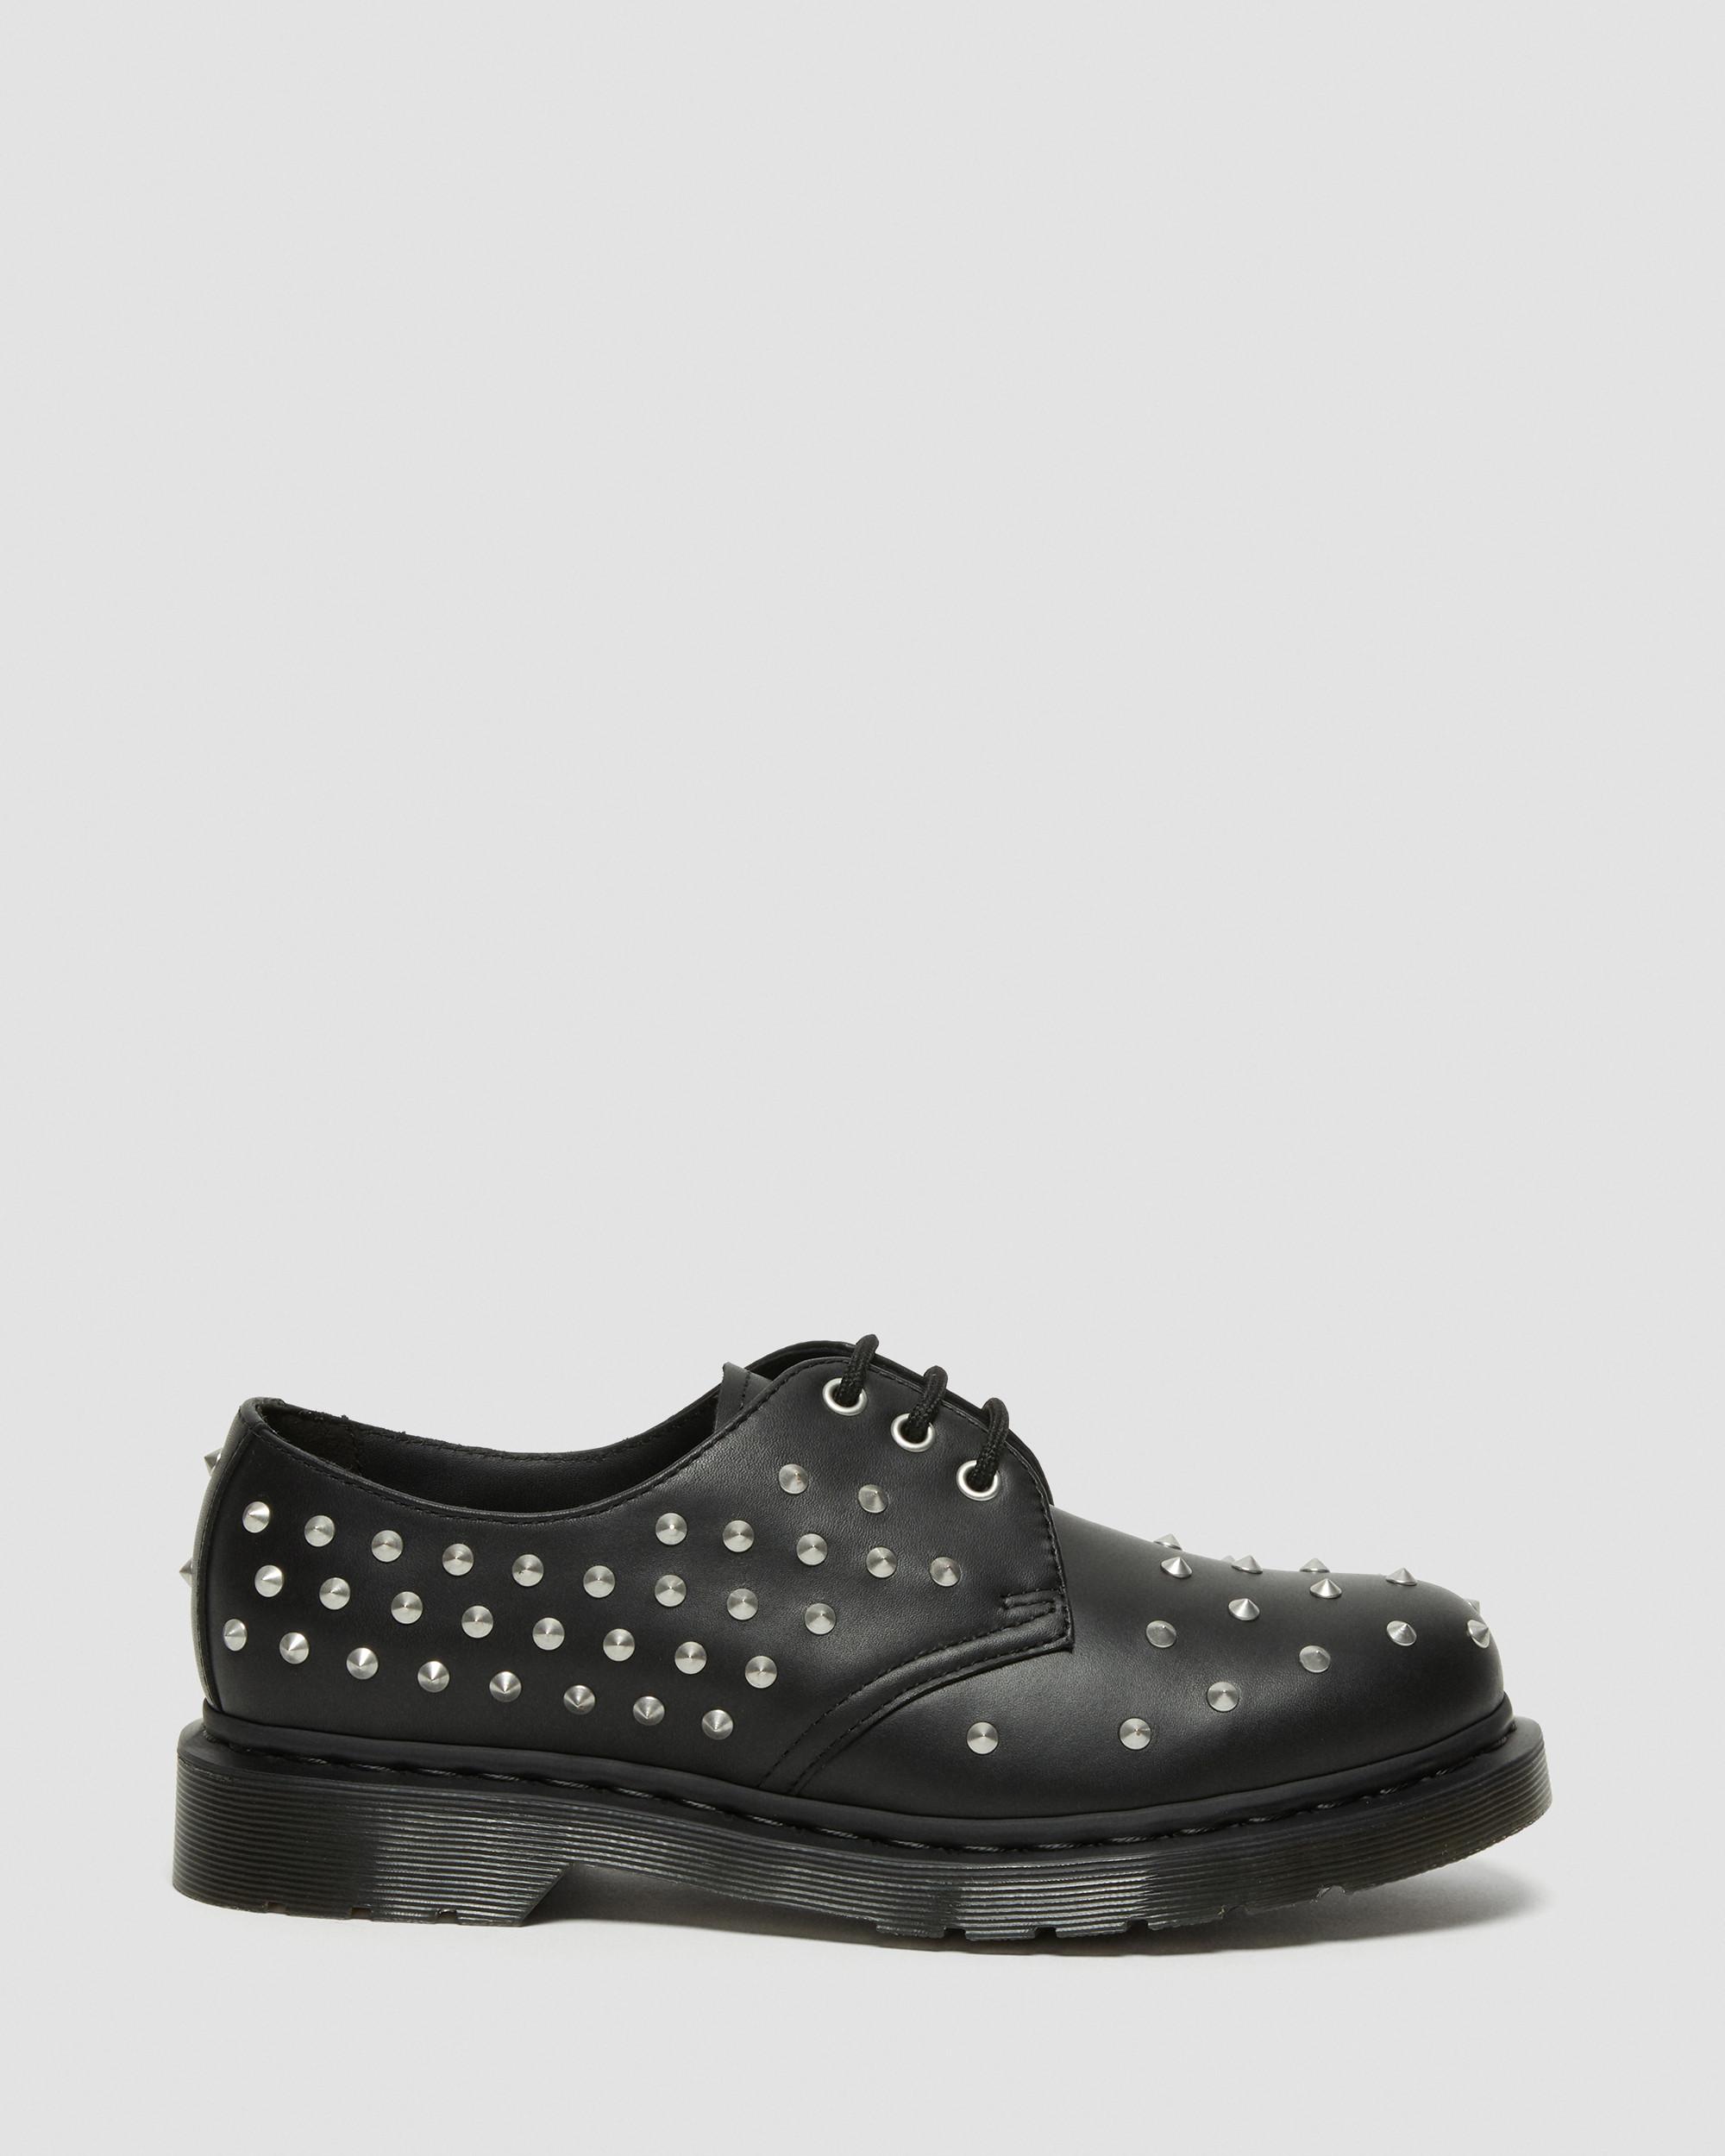 1461 Stud Wanama Leather Oxford Shoes, Black | Dr. Martens